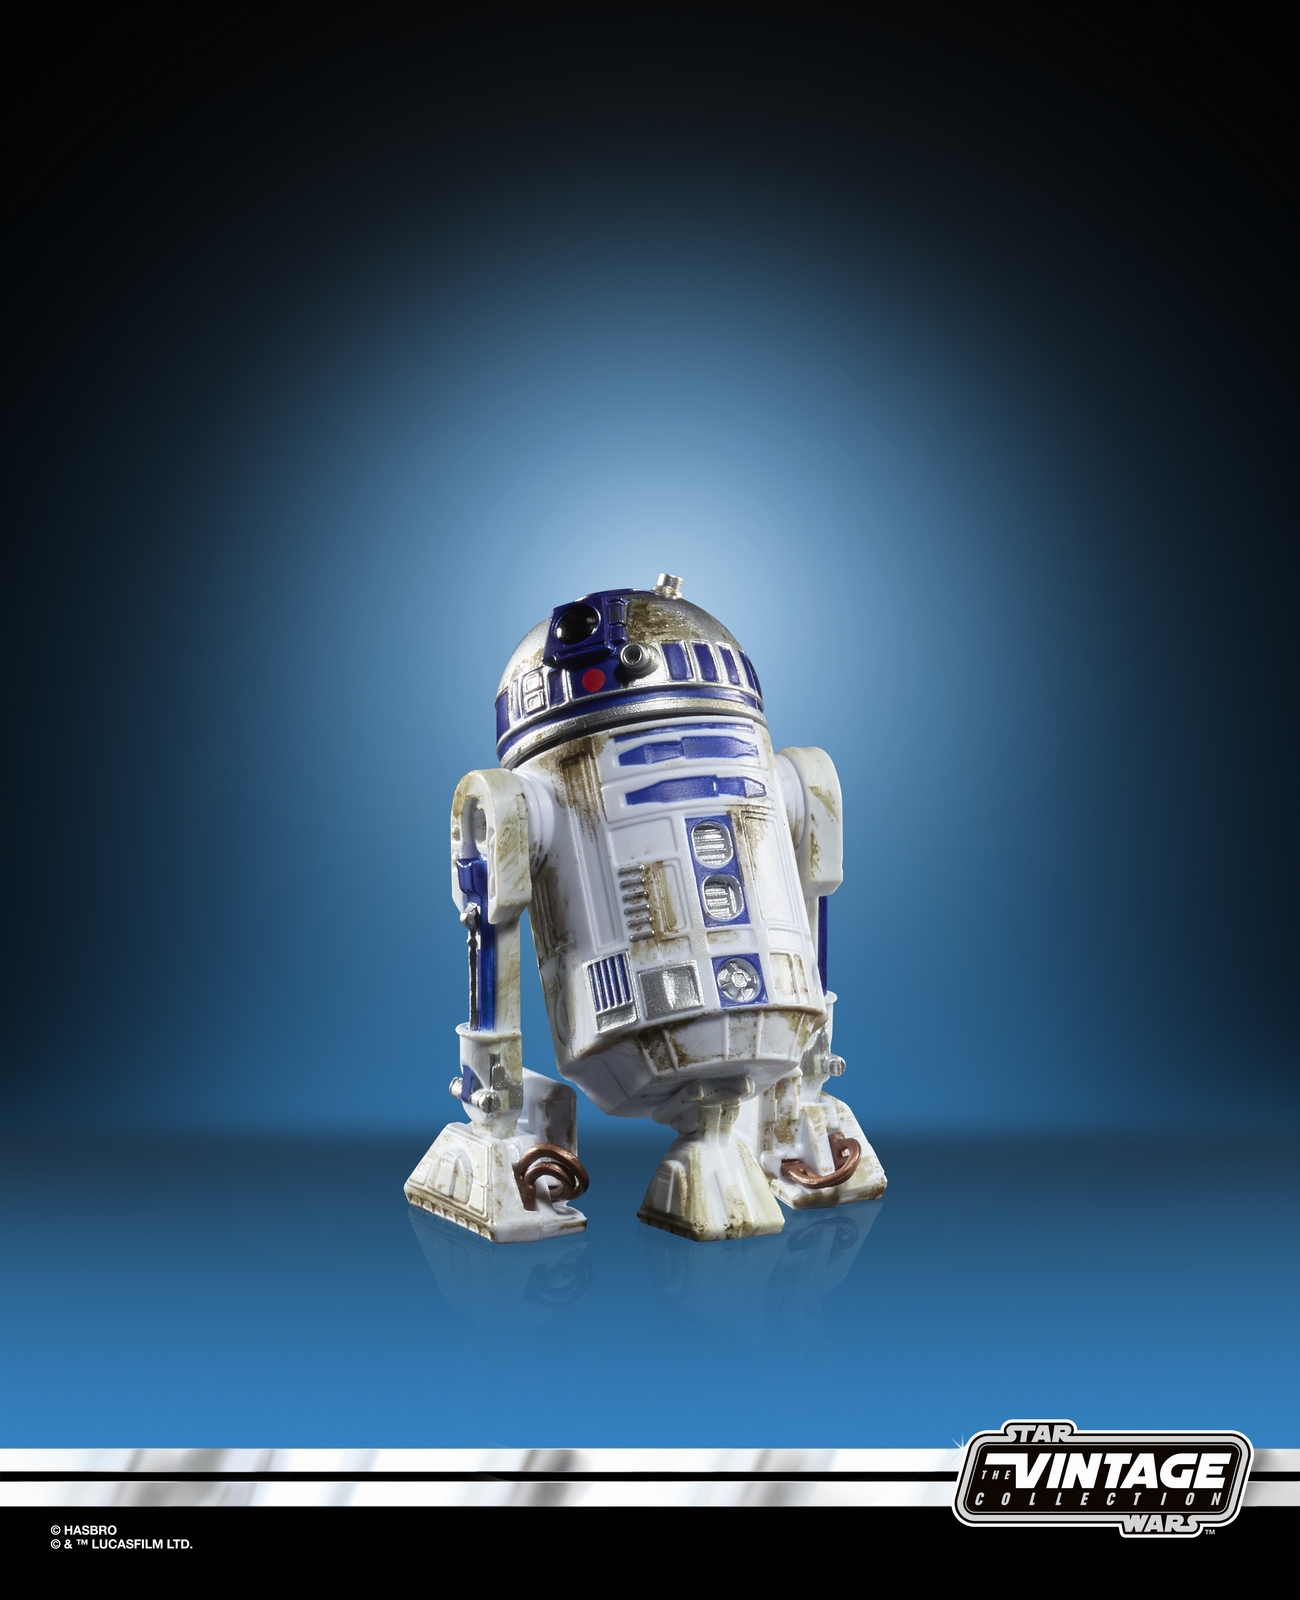 STAR WARS THE VINTAGE COLLECTION 3.75-INCH Figure Assortment - R2D2 (oop 1).jpg